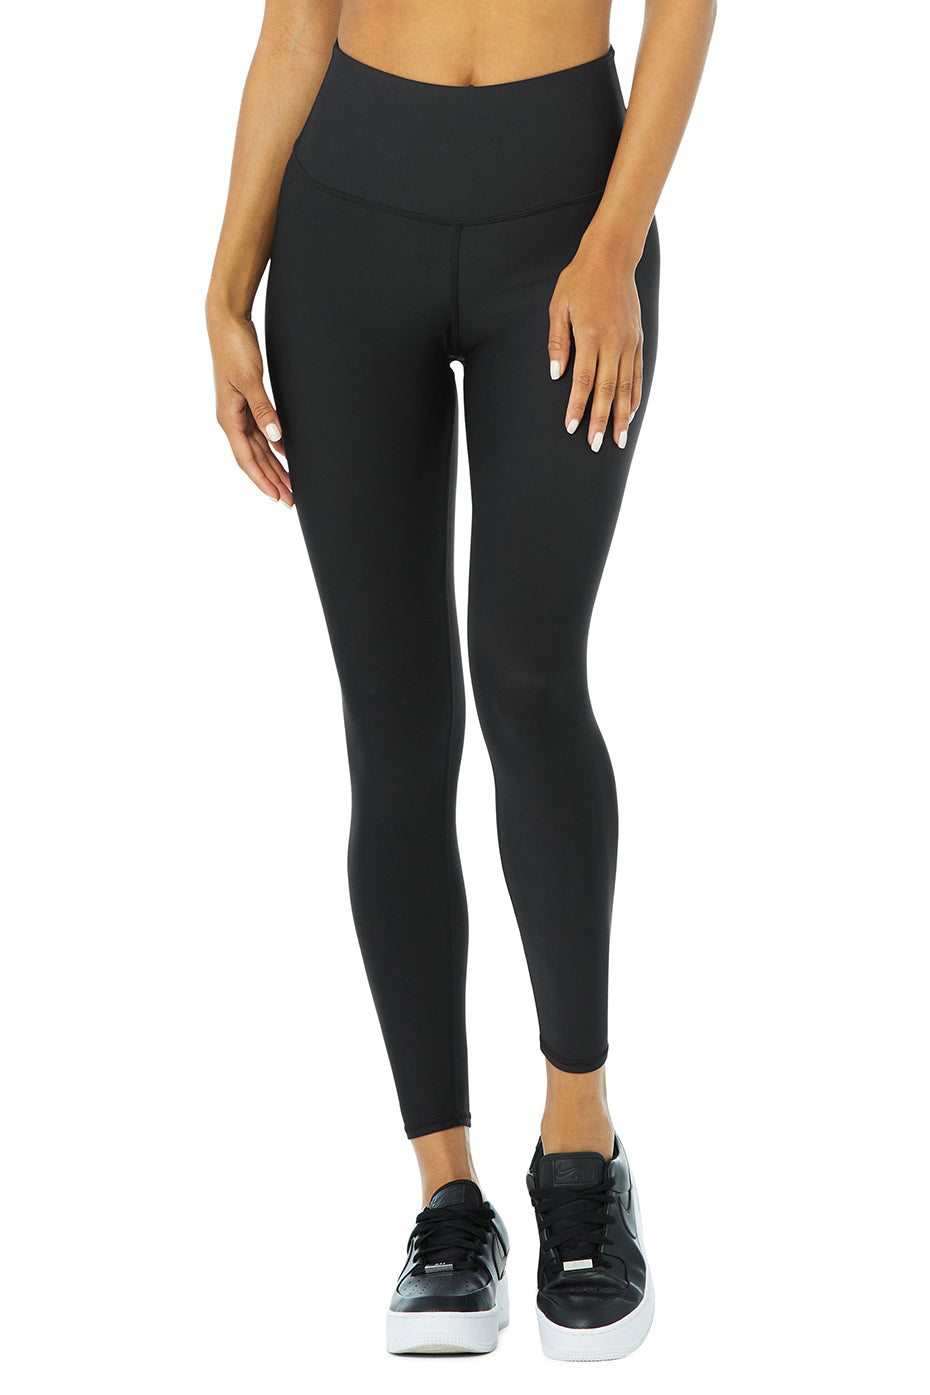 7/8 High-Waist Airlift Legging in Black by Alo Yoga - Work Well Daily